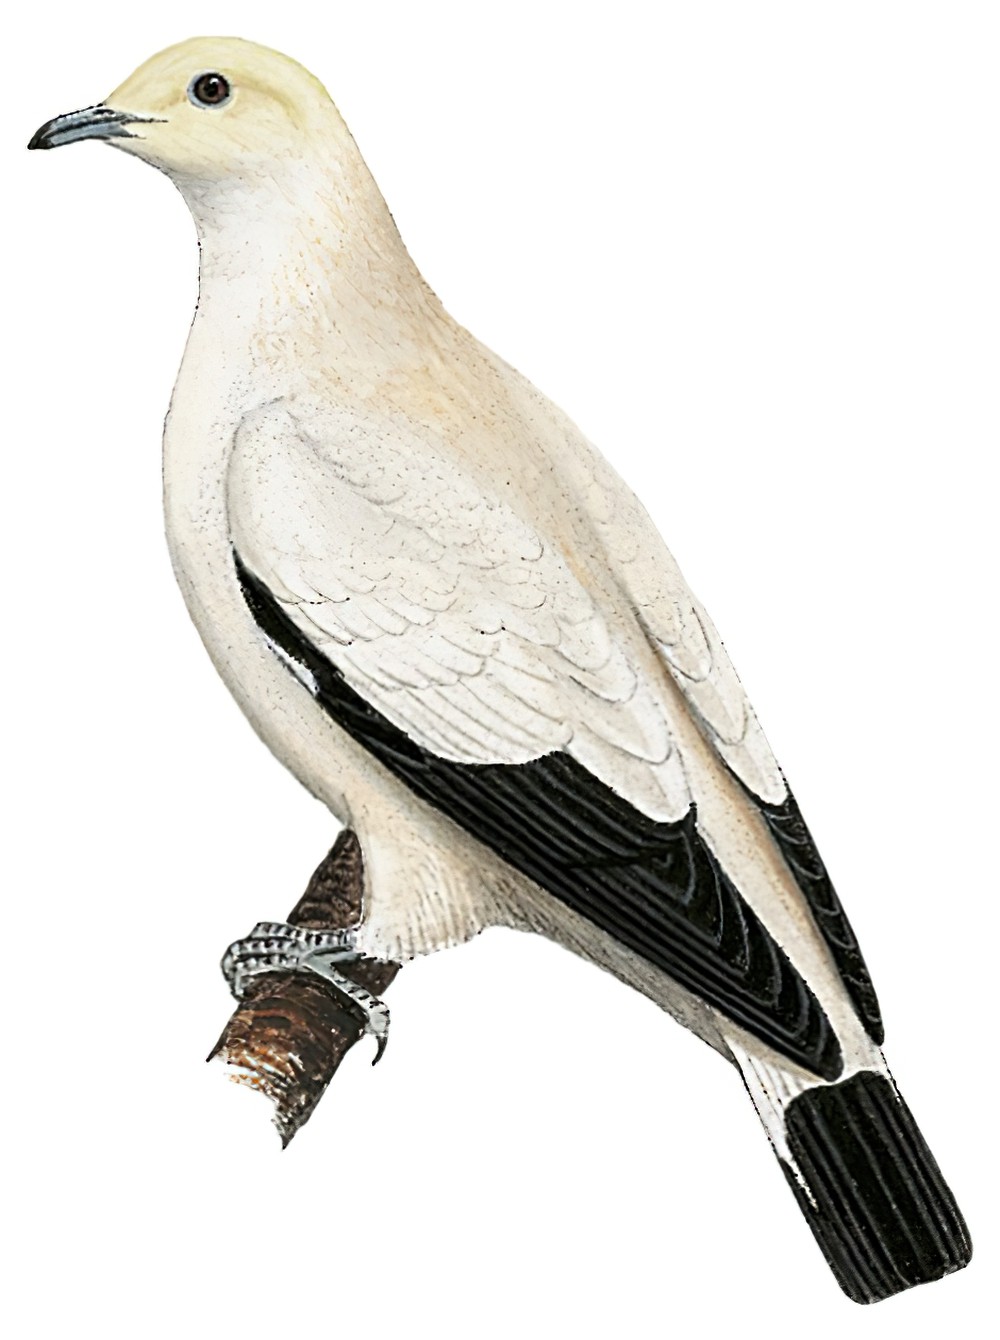 Pied Imperial-Pigeon / Ducula bicolor